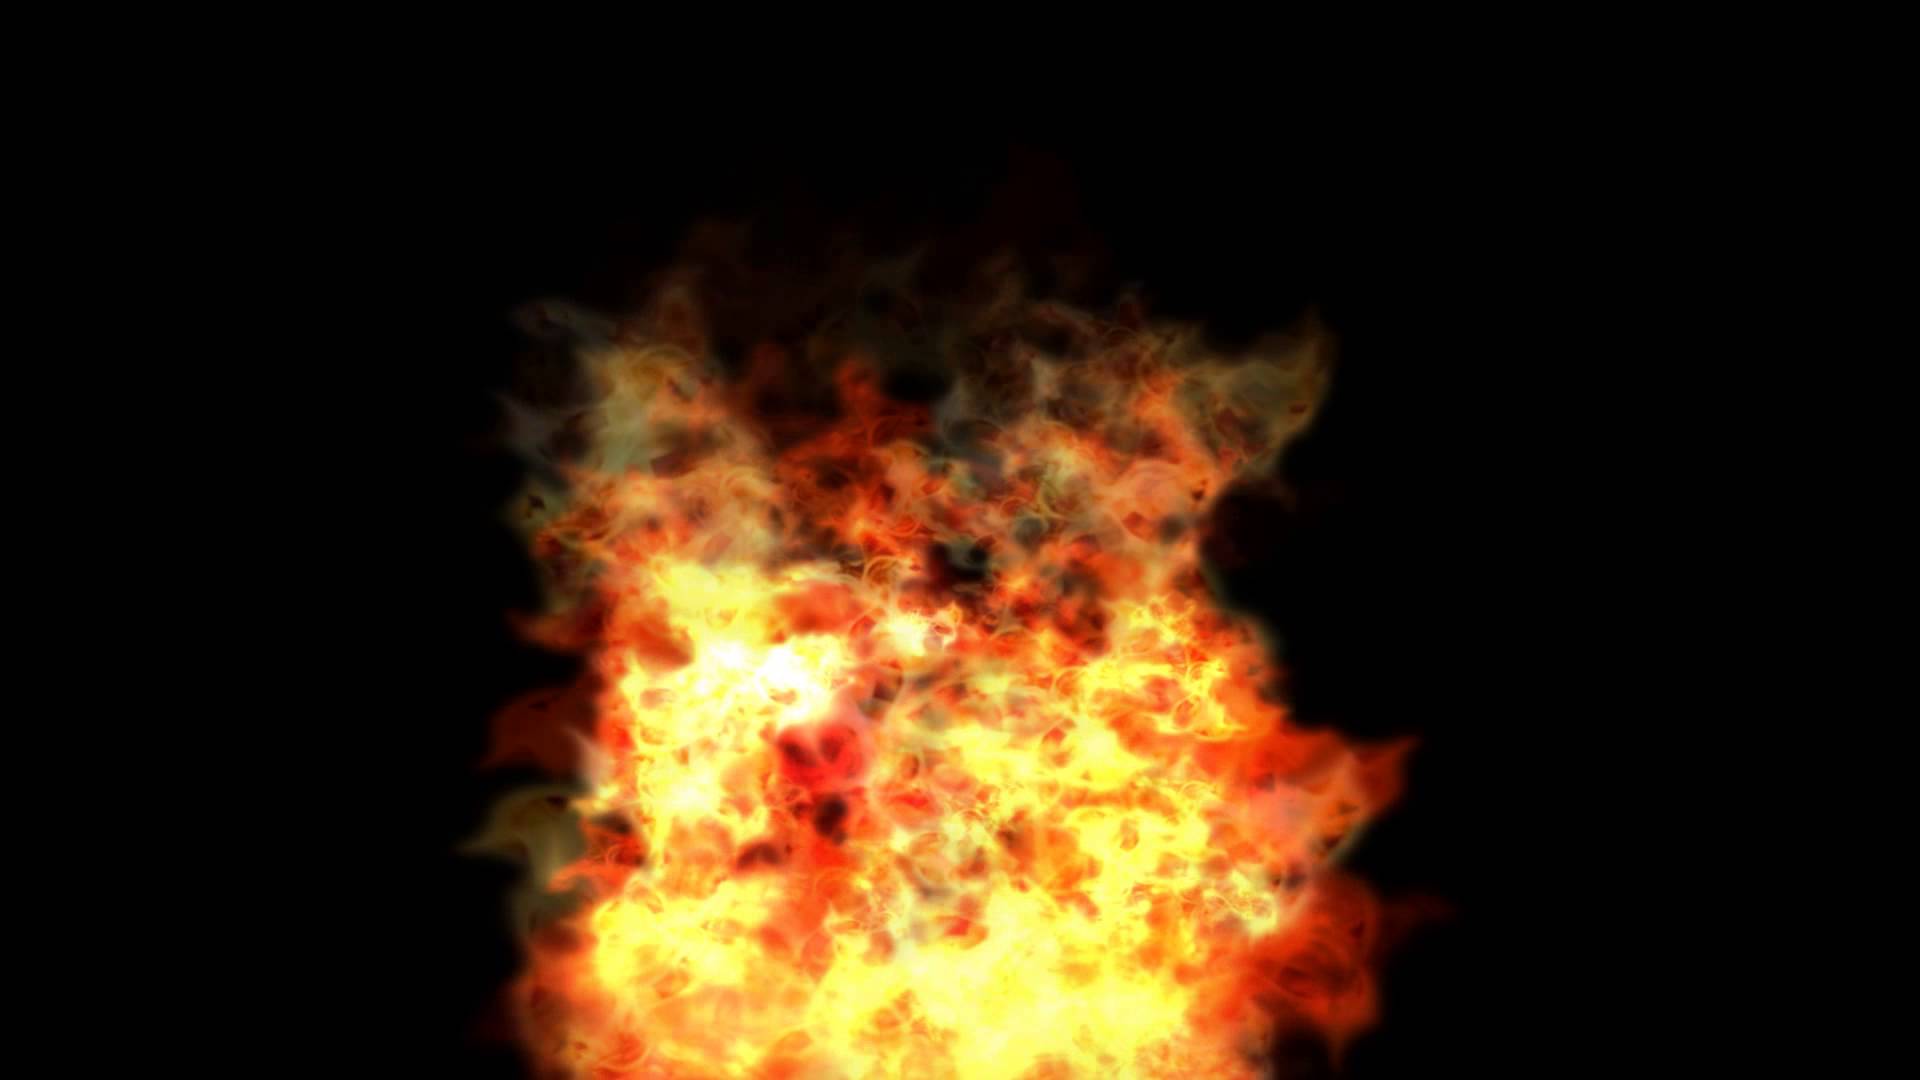 Fire 10 Black background ANIMATION FREE FOOTAGE HD